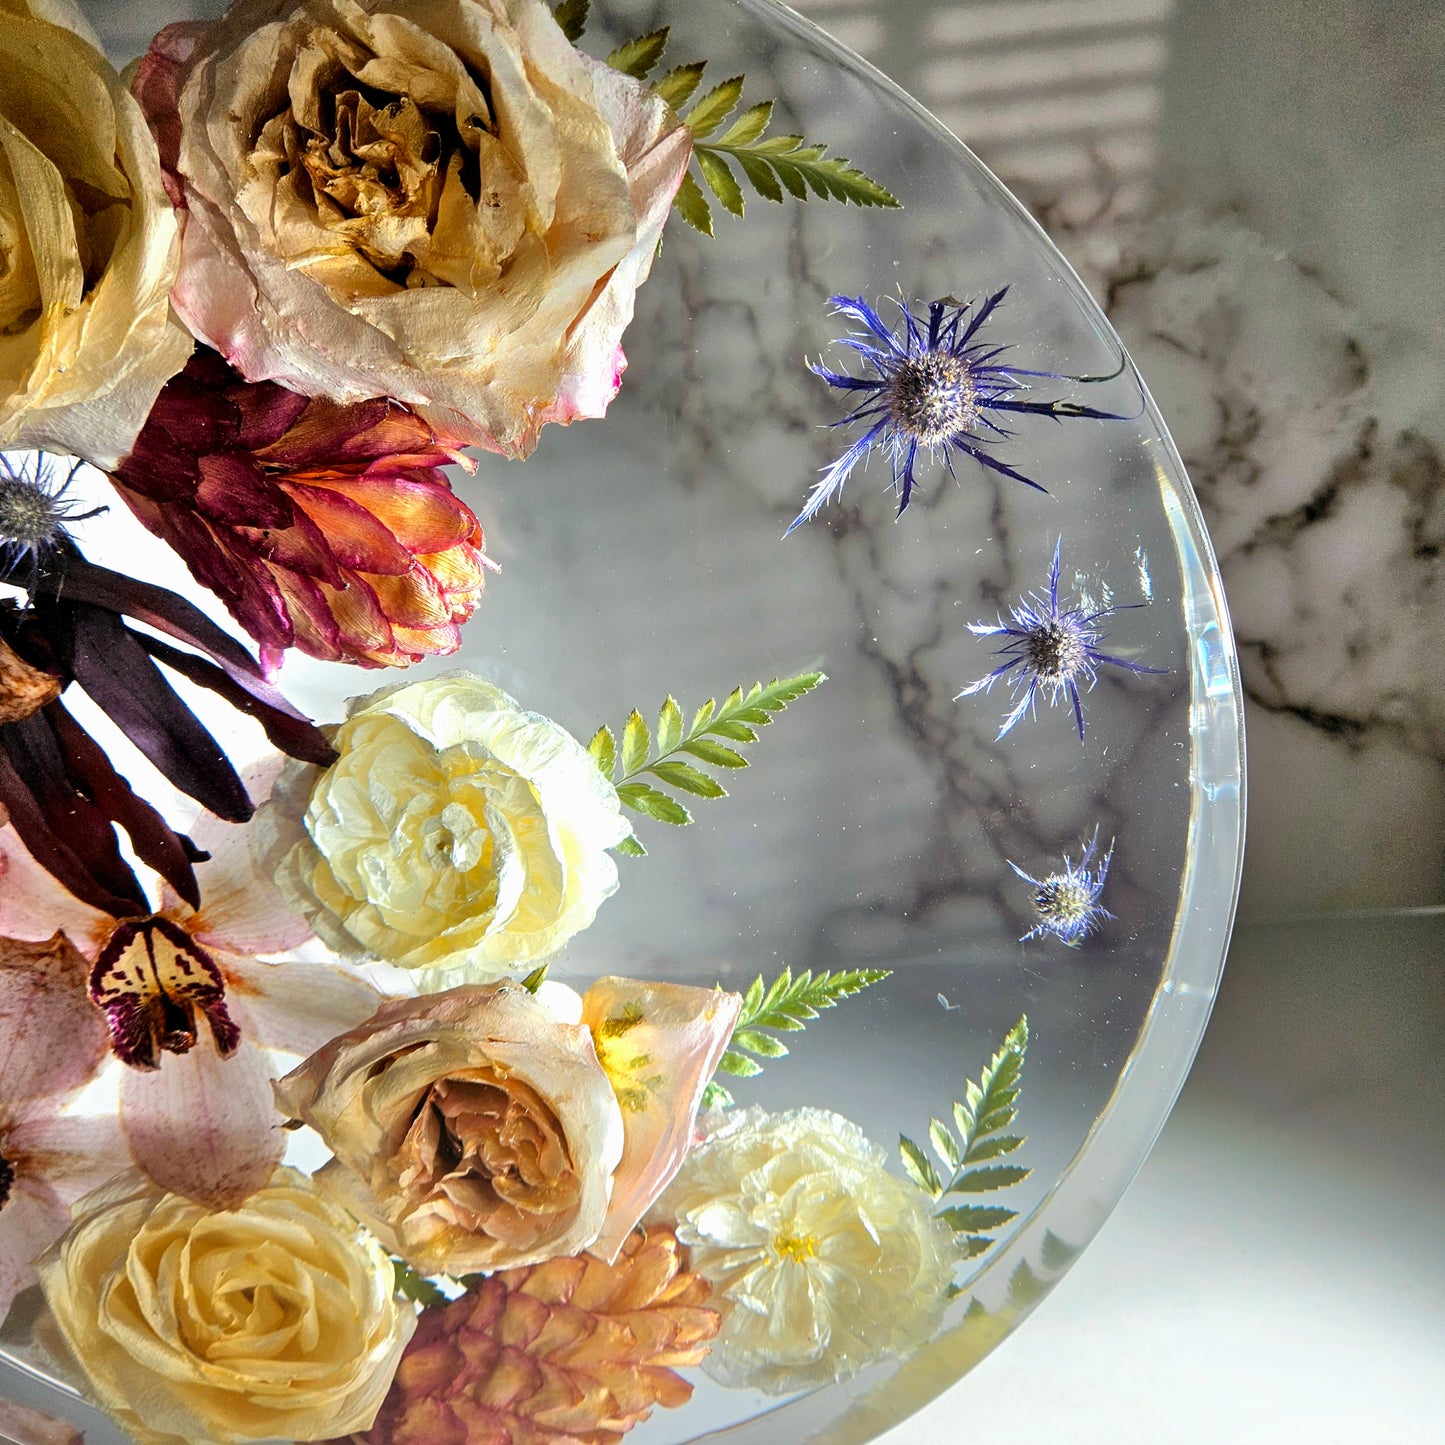 Large 14" Round 3D Resin Wedding Bouquet Preservation Keepsake Gift Save Your Wedding Flowers Forever